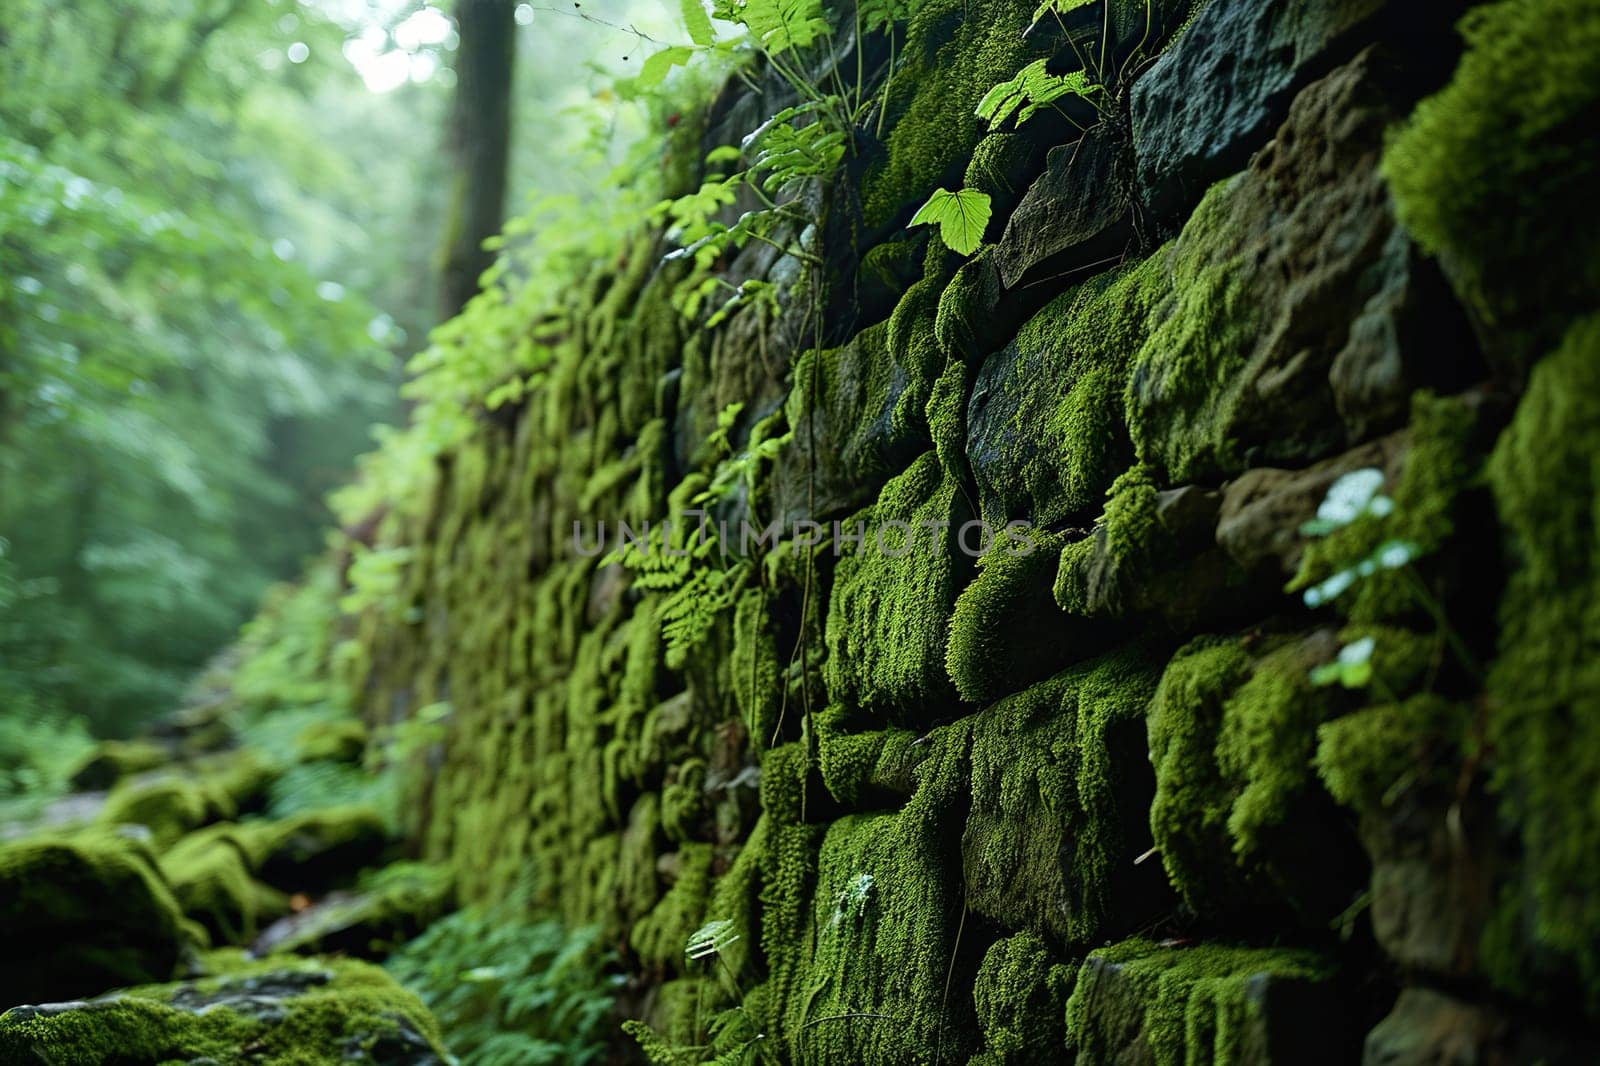 Close-up of moss on a wall in the forest.